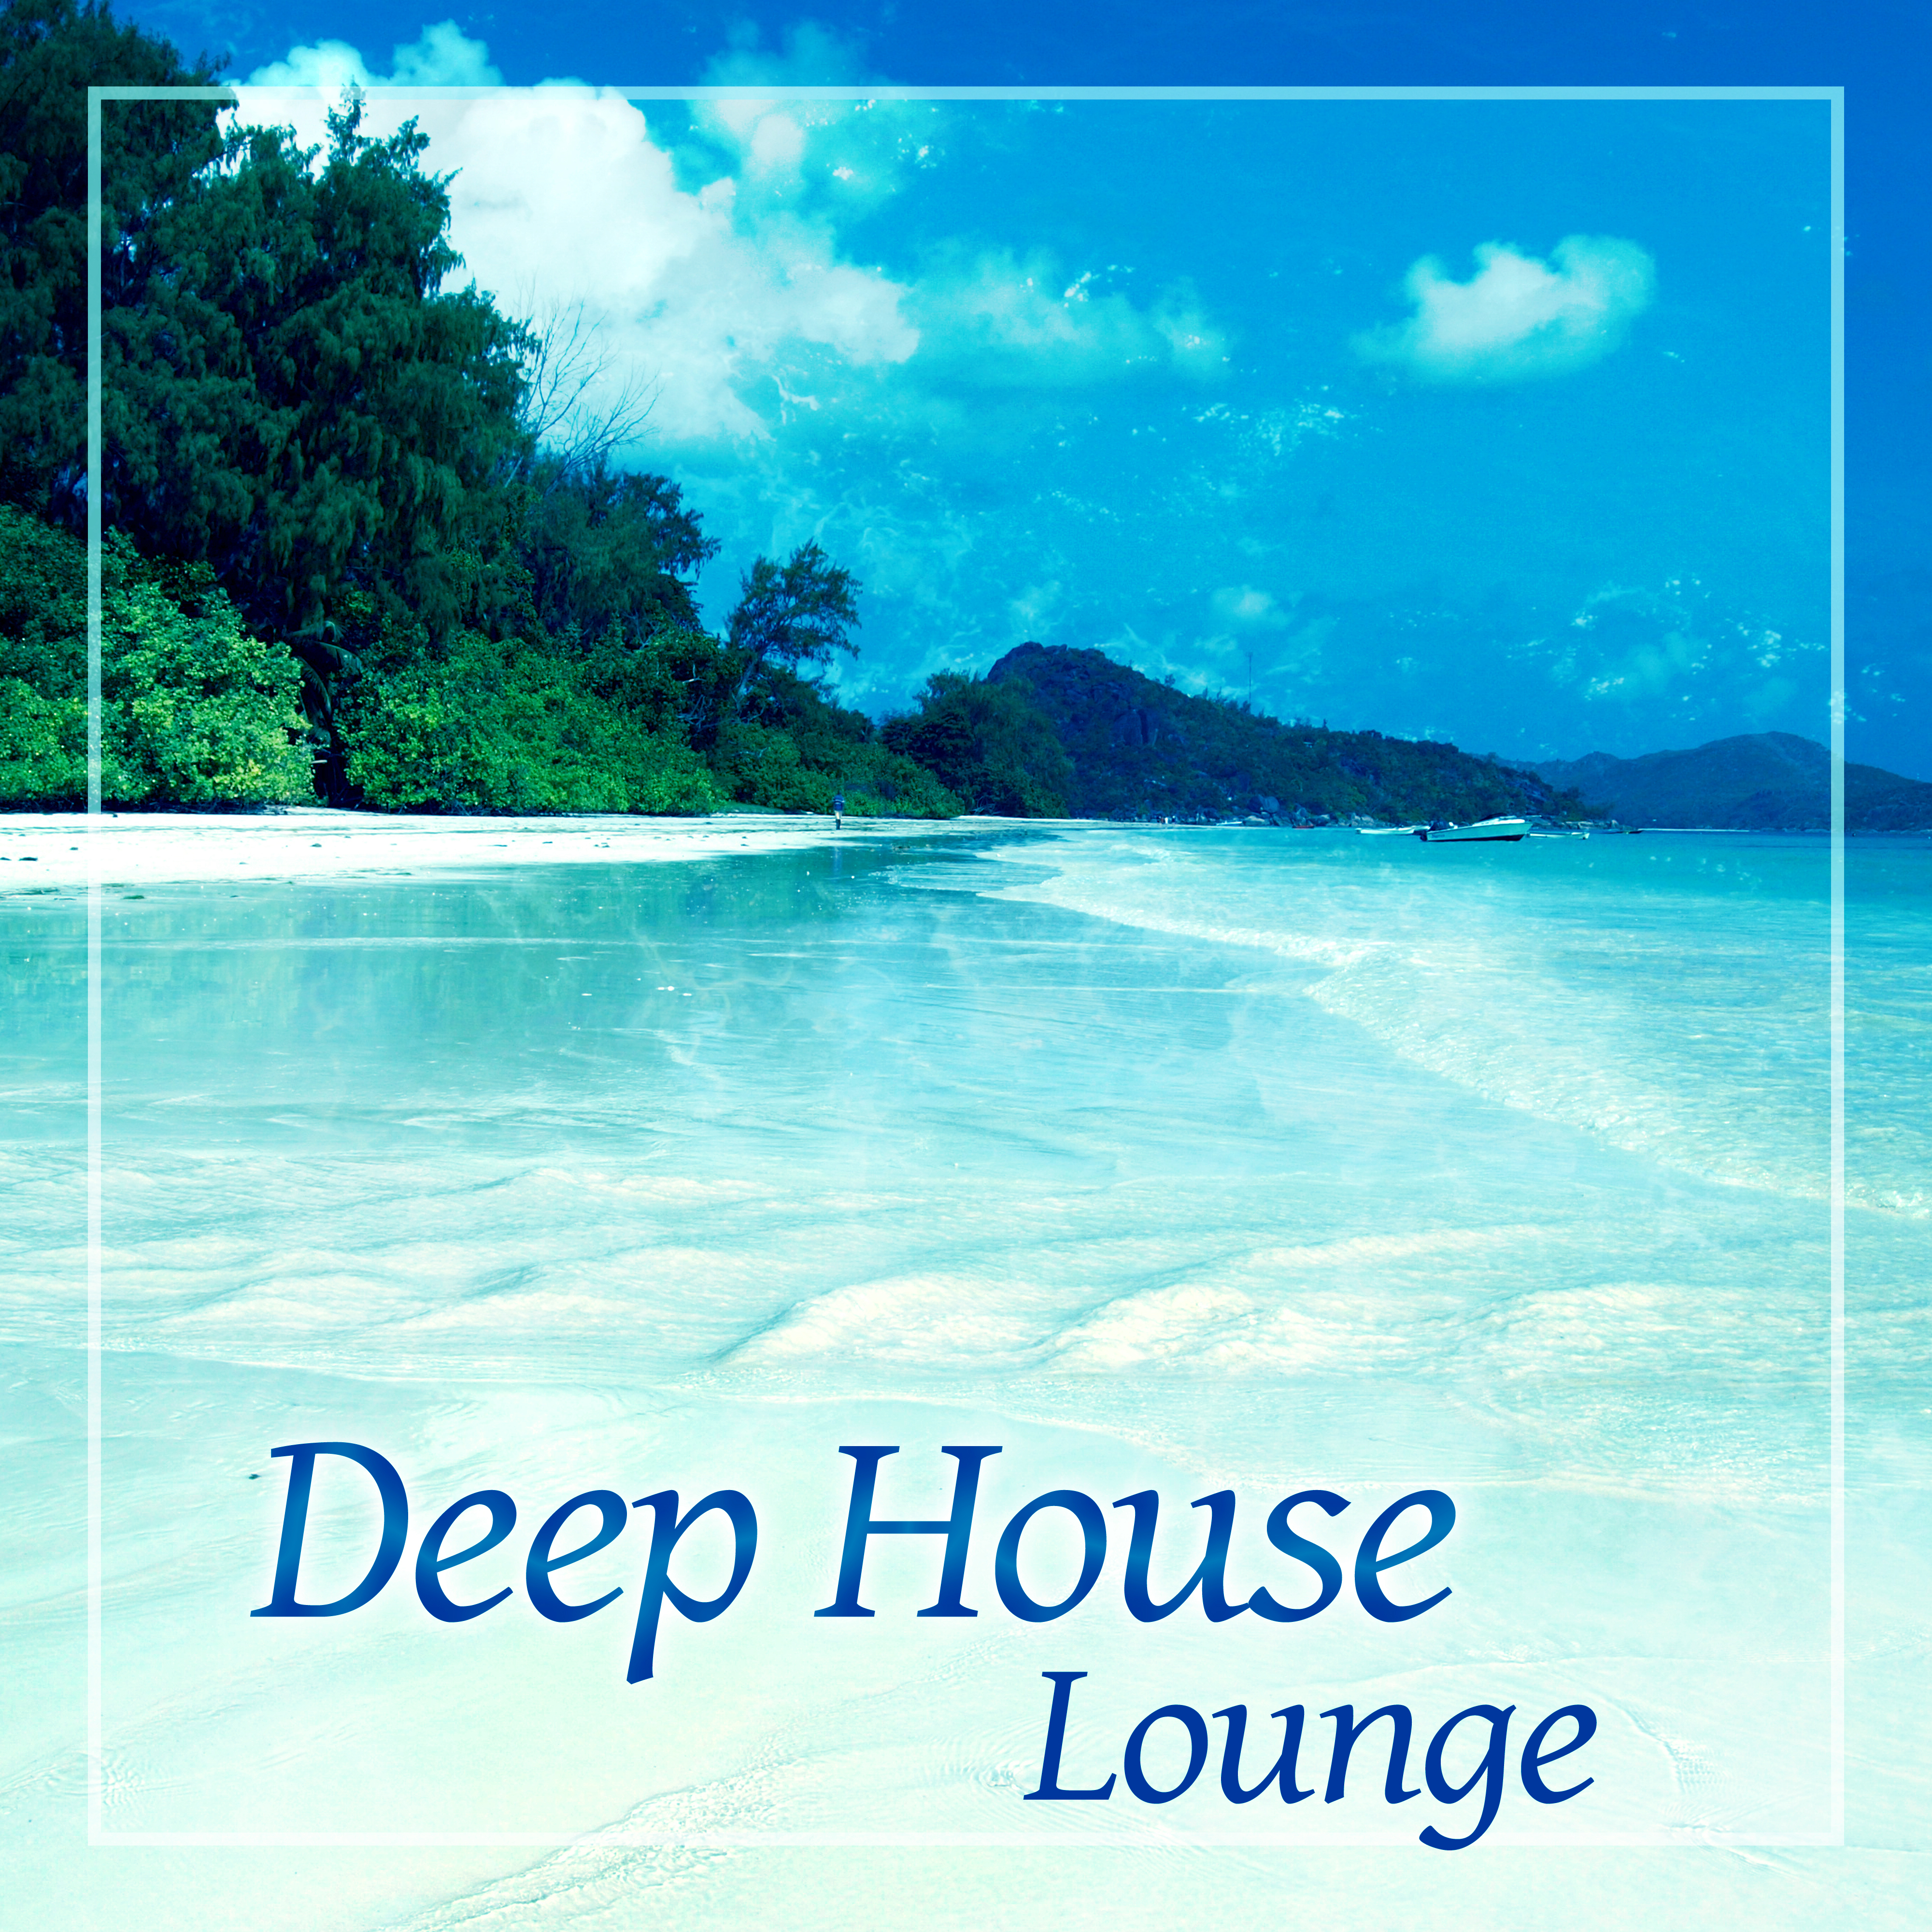 Deep House Lounge  Chill Out Music, Positive Vibes, Beach Party, Ibiza Chill Out, Ambient Lounge